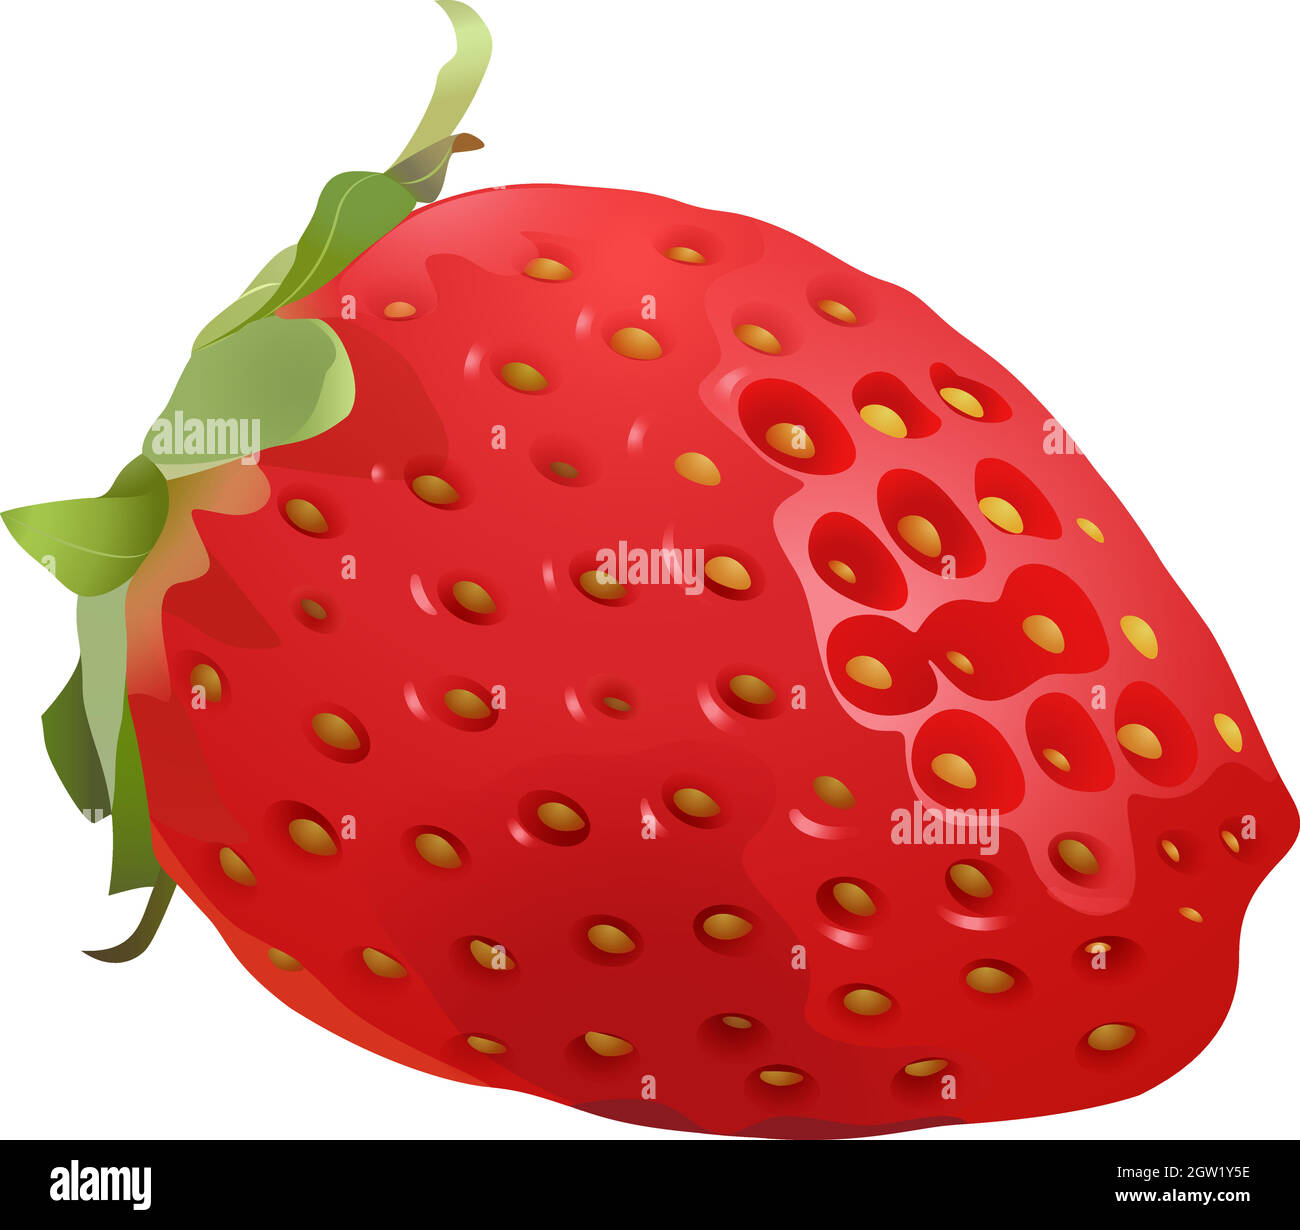 Delicious and juicy stawberry Stock Vector